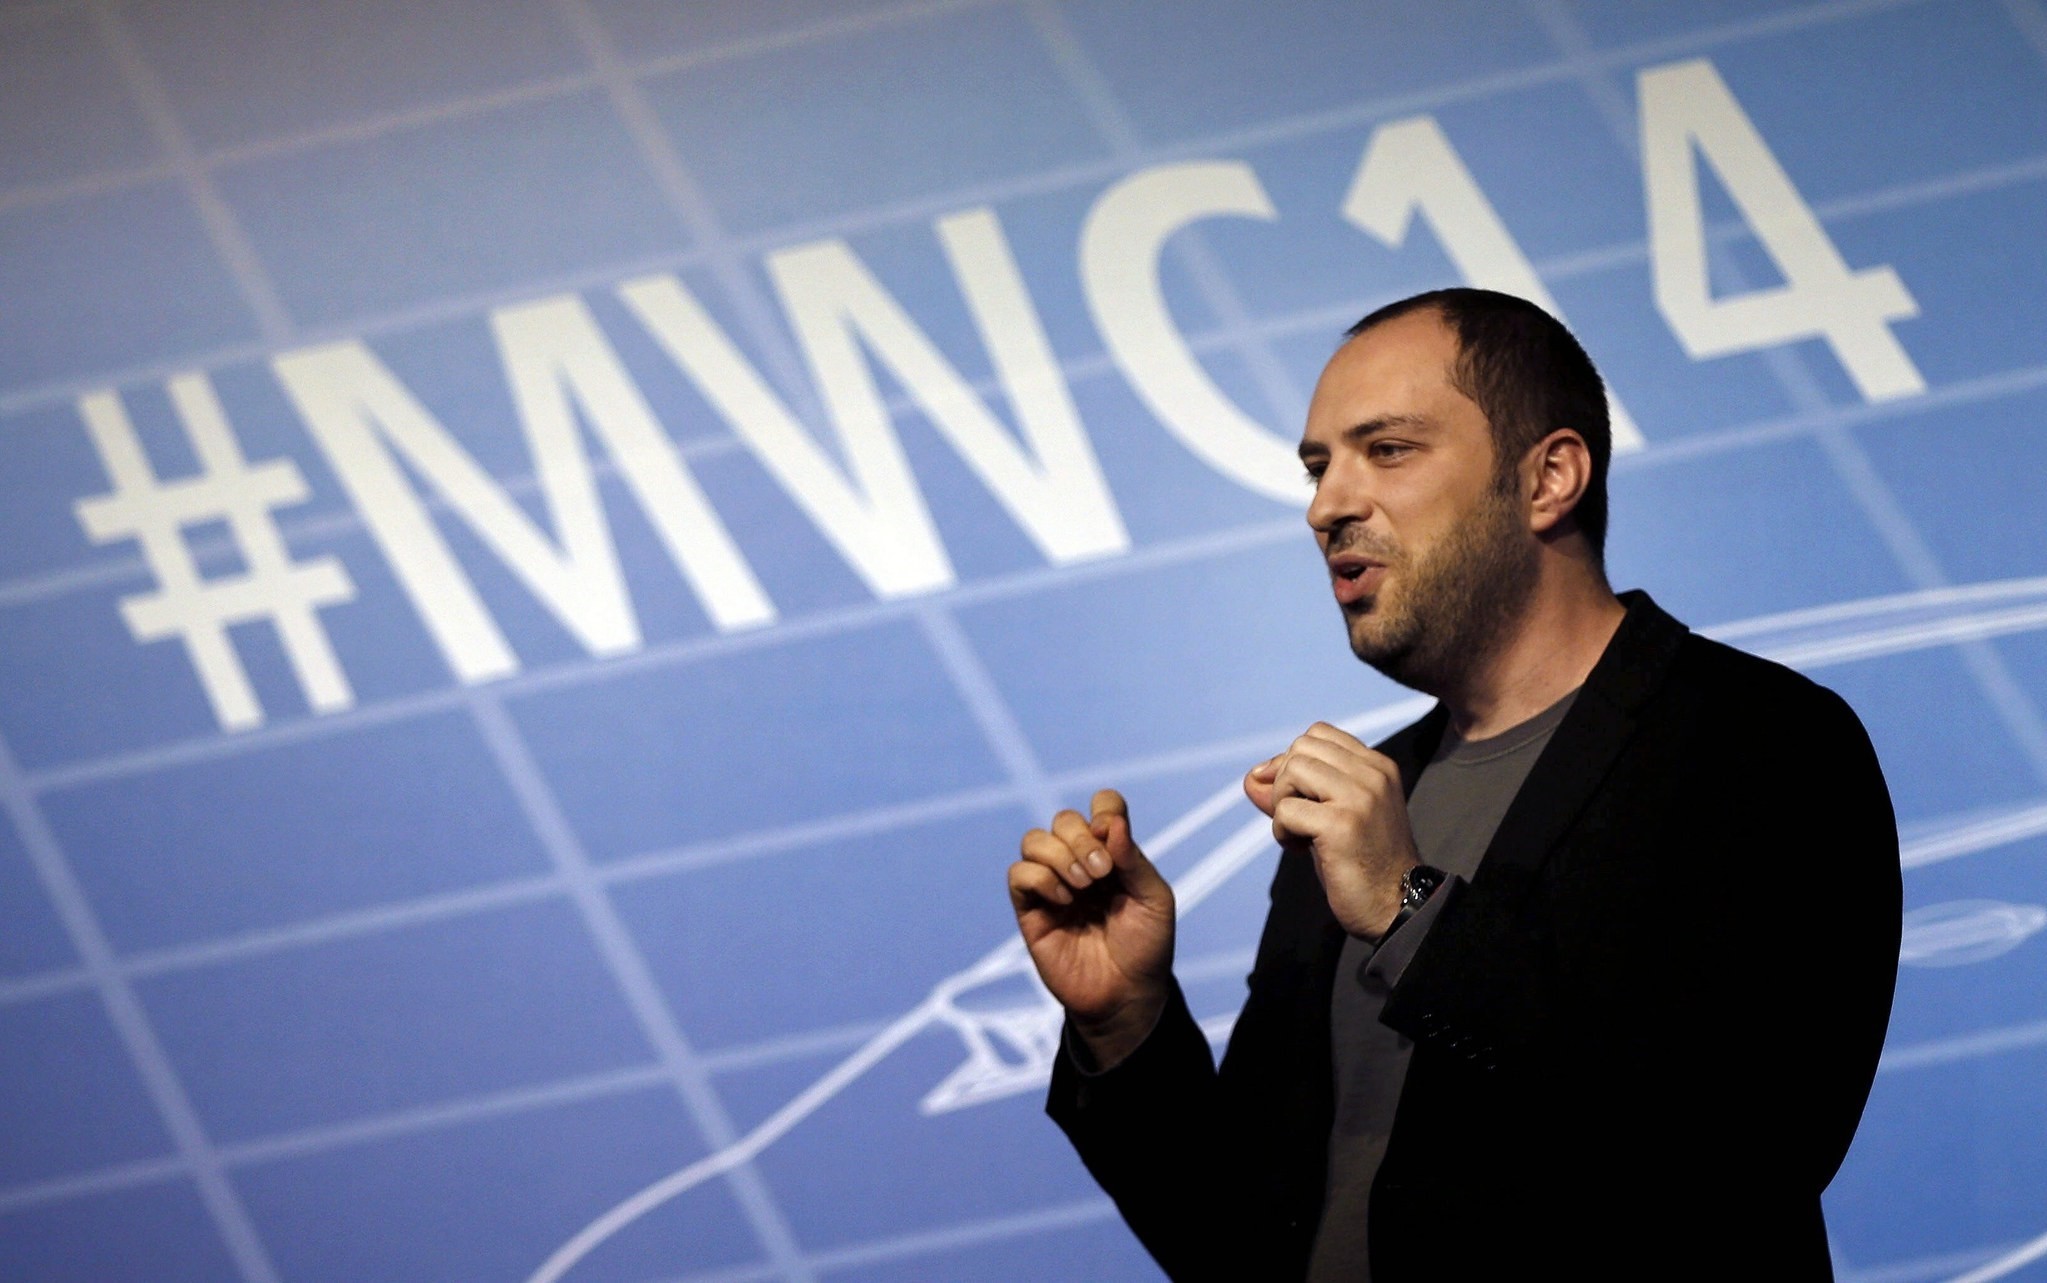 WhatsApp message appu2019s co-founder, Jan Koum, delivers a speech as he takes part in a debate held on the sidelines of the Mobile World Congress in Barcelona in 2014.